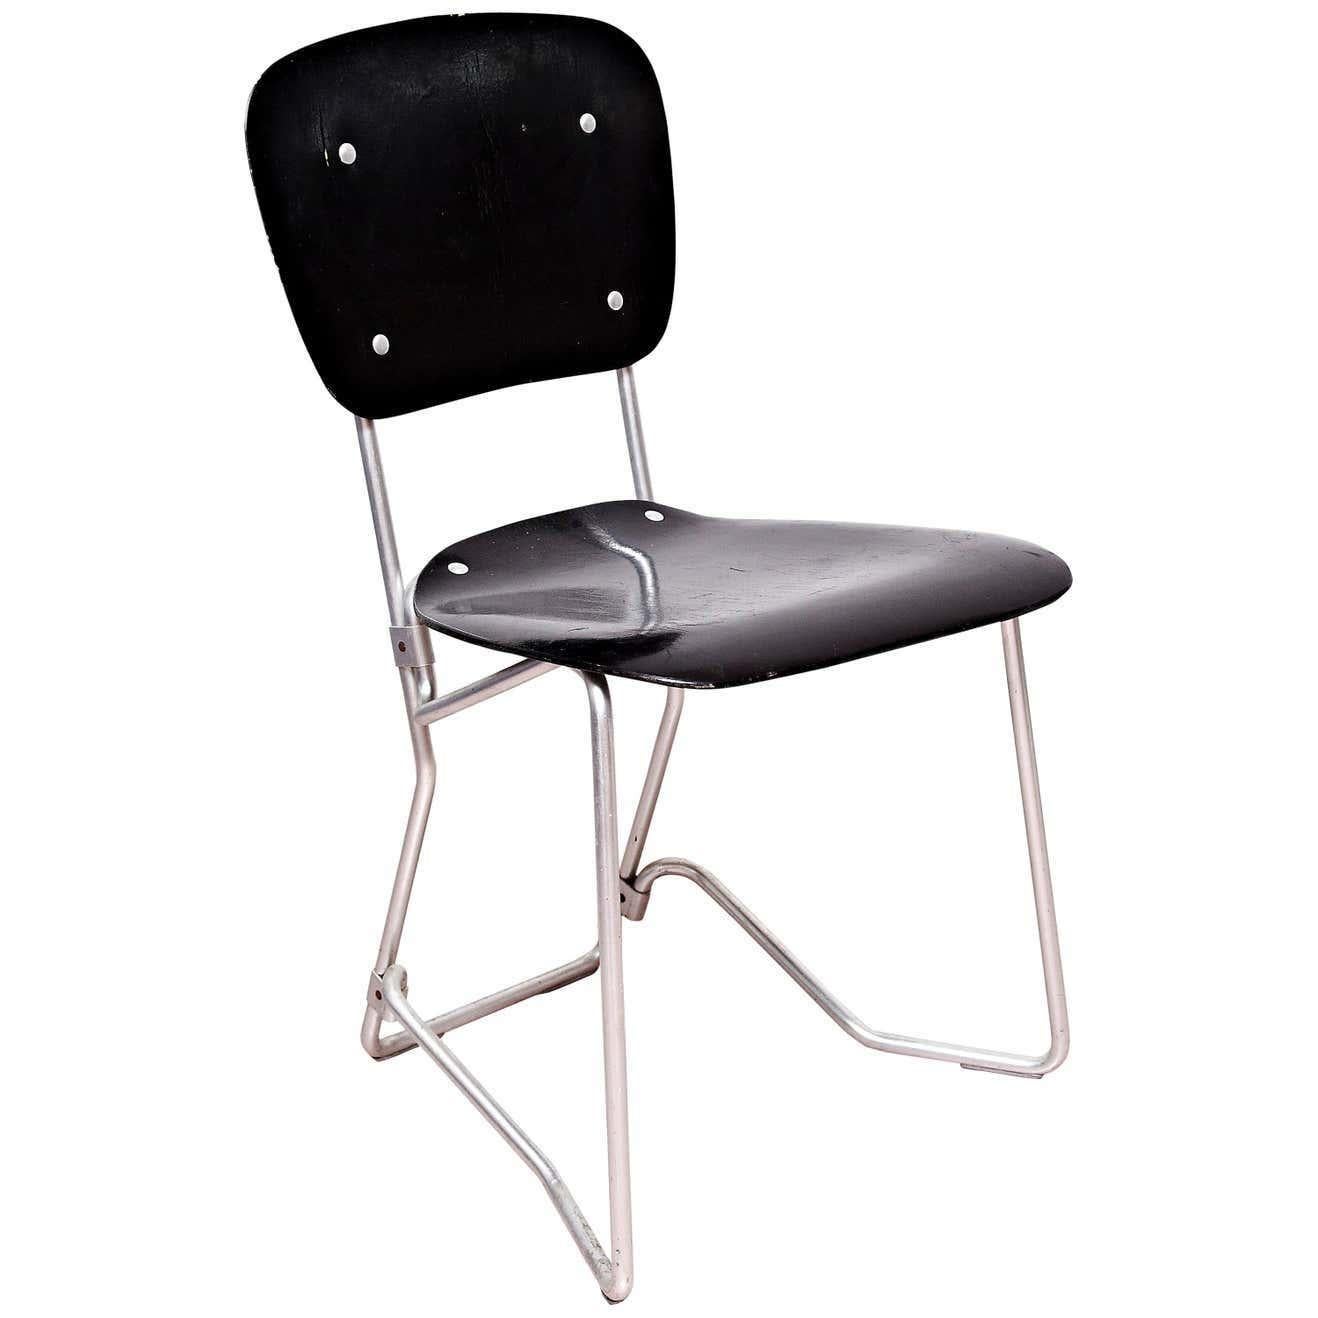 Armin Wirth Mid-Century Modern Metal and Wood Swiss Stackable Chairs for Aluflex For Sale 5